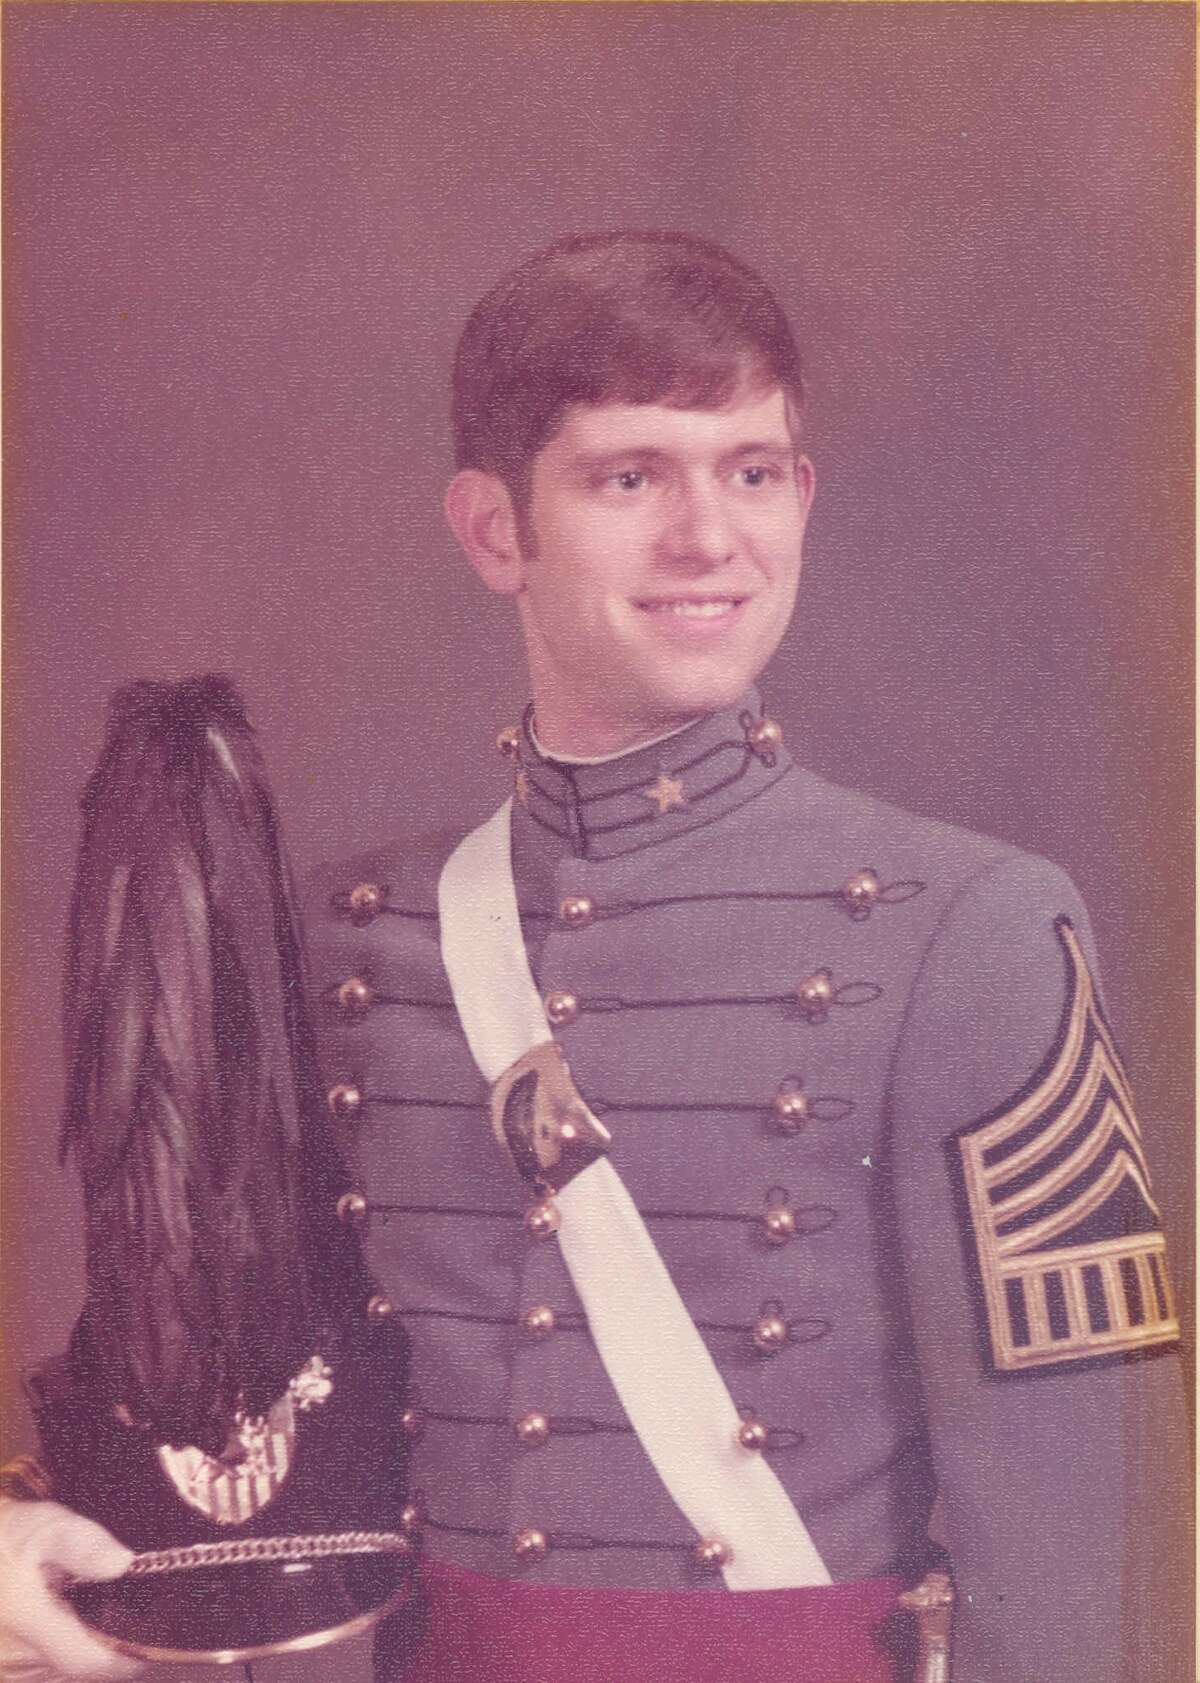 Dr. Ian Thompson, director of the Cancer Therapy & Research Center at the UT Health Science Center, pictured at West Point, where he received his undergraduate degree.